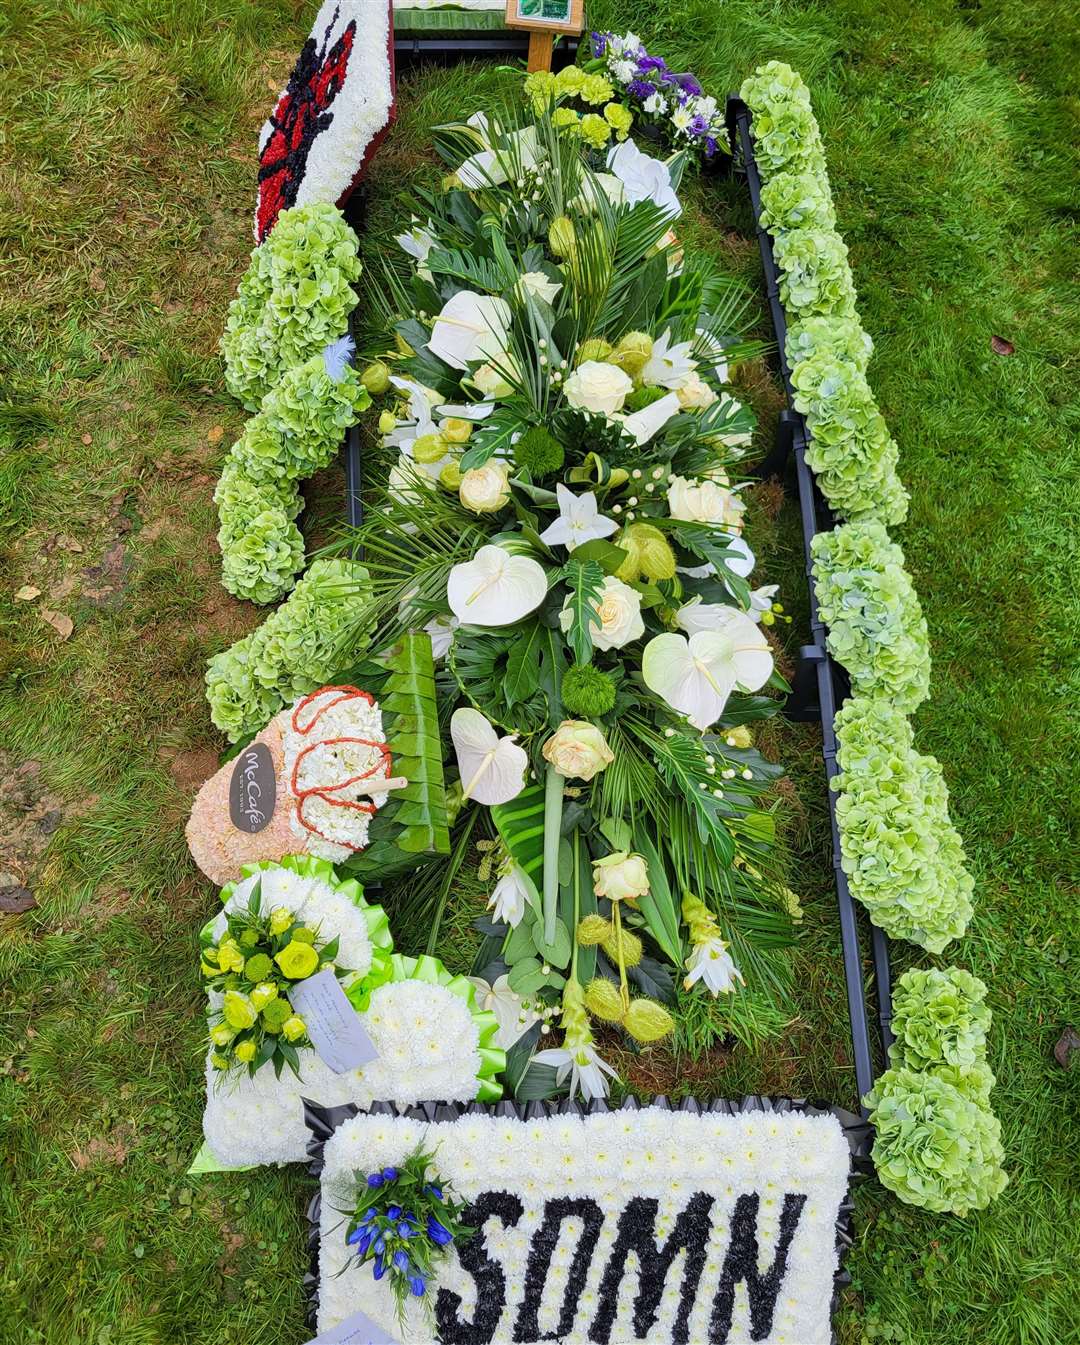 Flowers of Oli’s favourite things have been laid by his grave. Picture: The Life Narrator